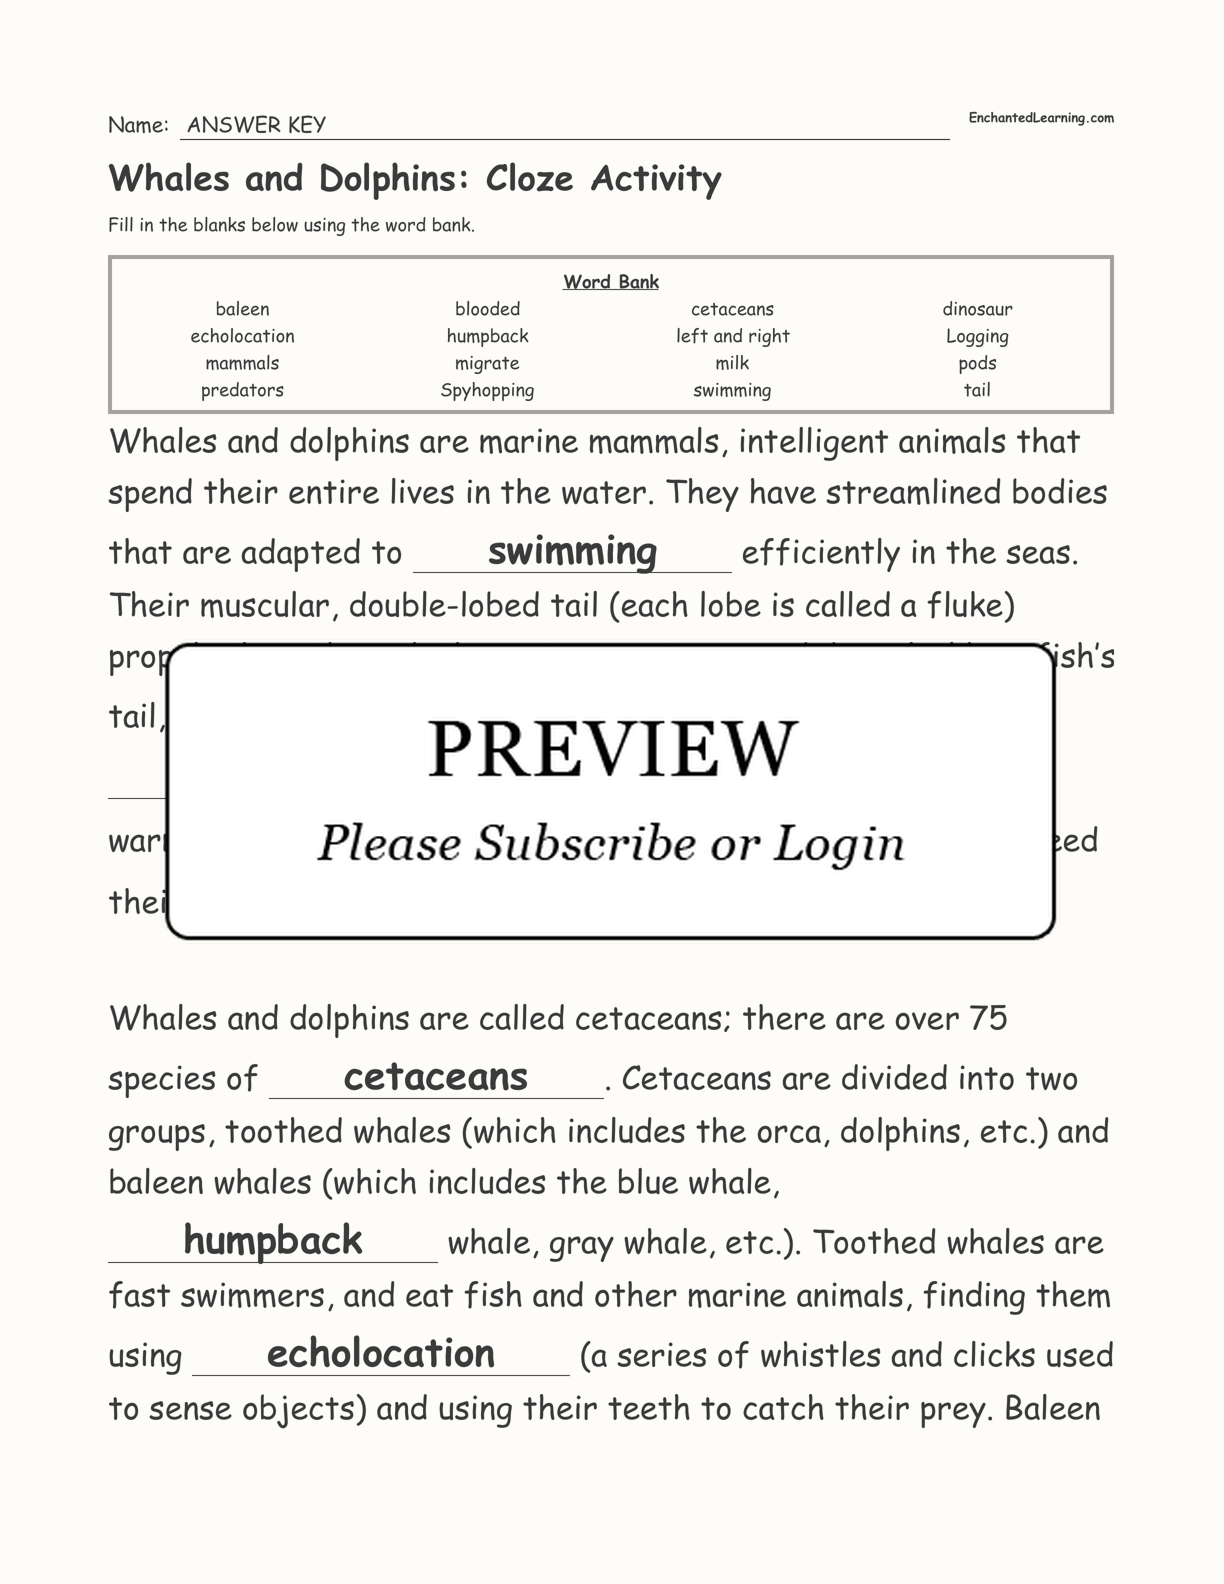 Whales and Dolphins: Cloze Activity interactive worksheet page 3